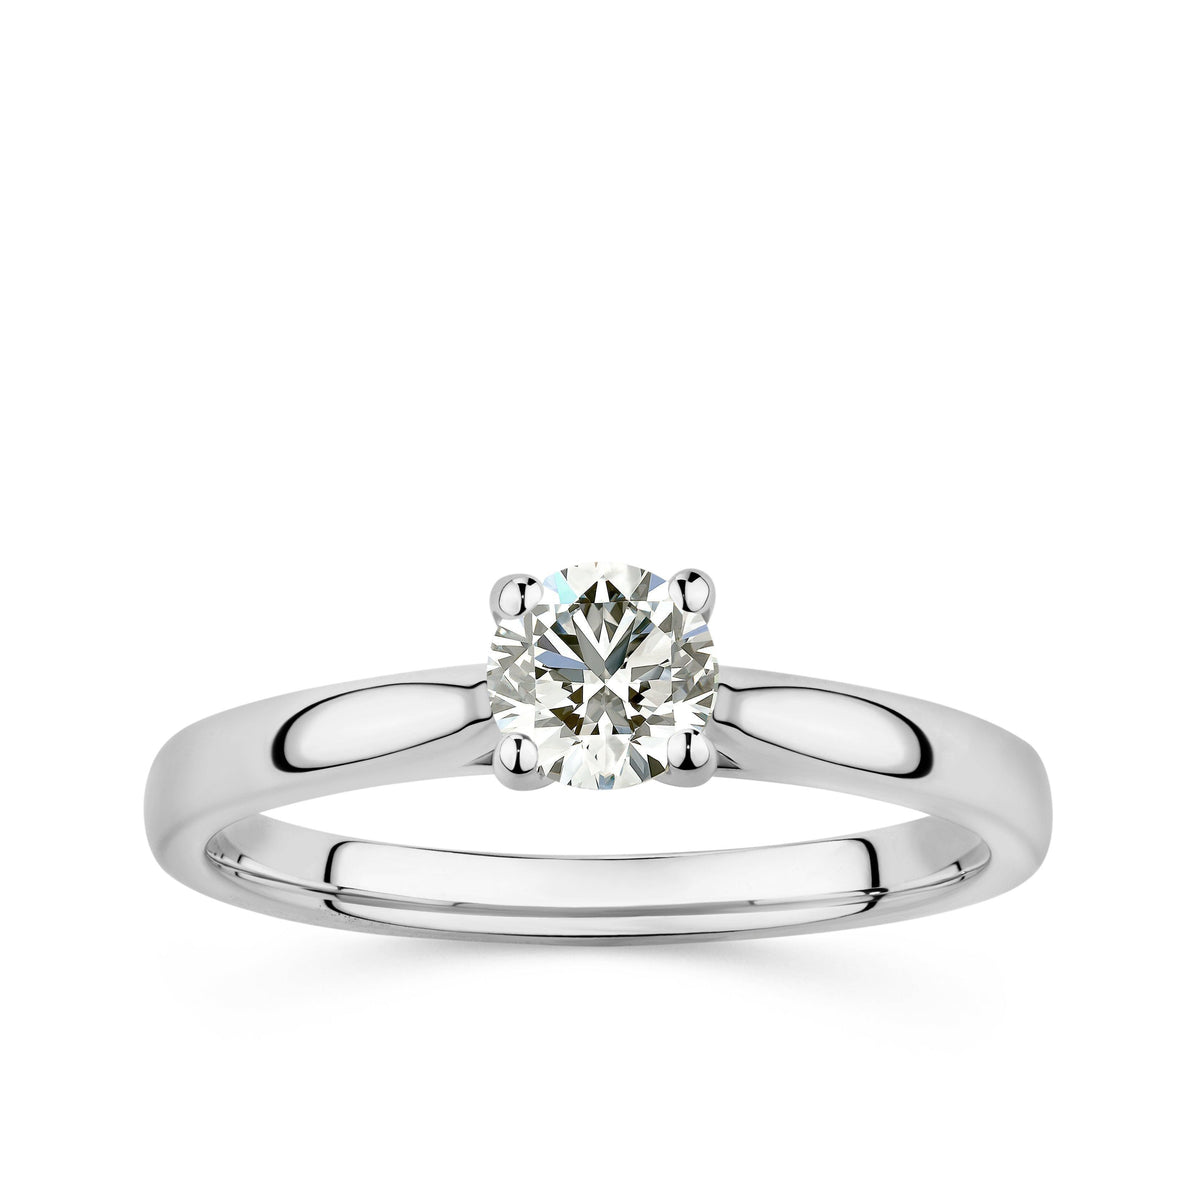 Rendition 0.50ct TW Diamond Solitaire Ring in 9ct White Gold - Wallace Bishop